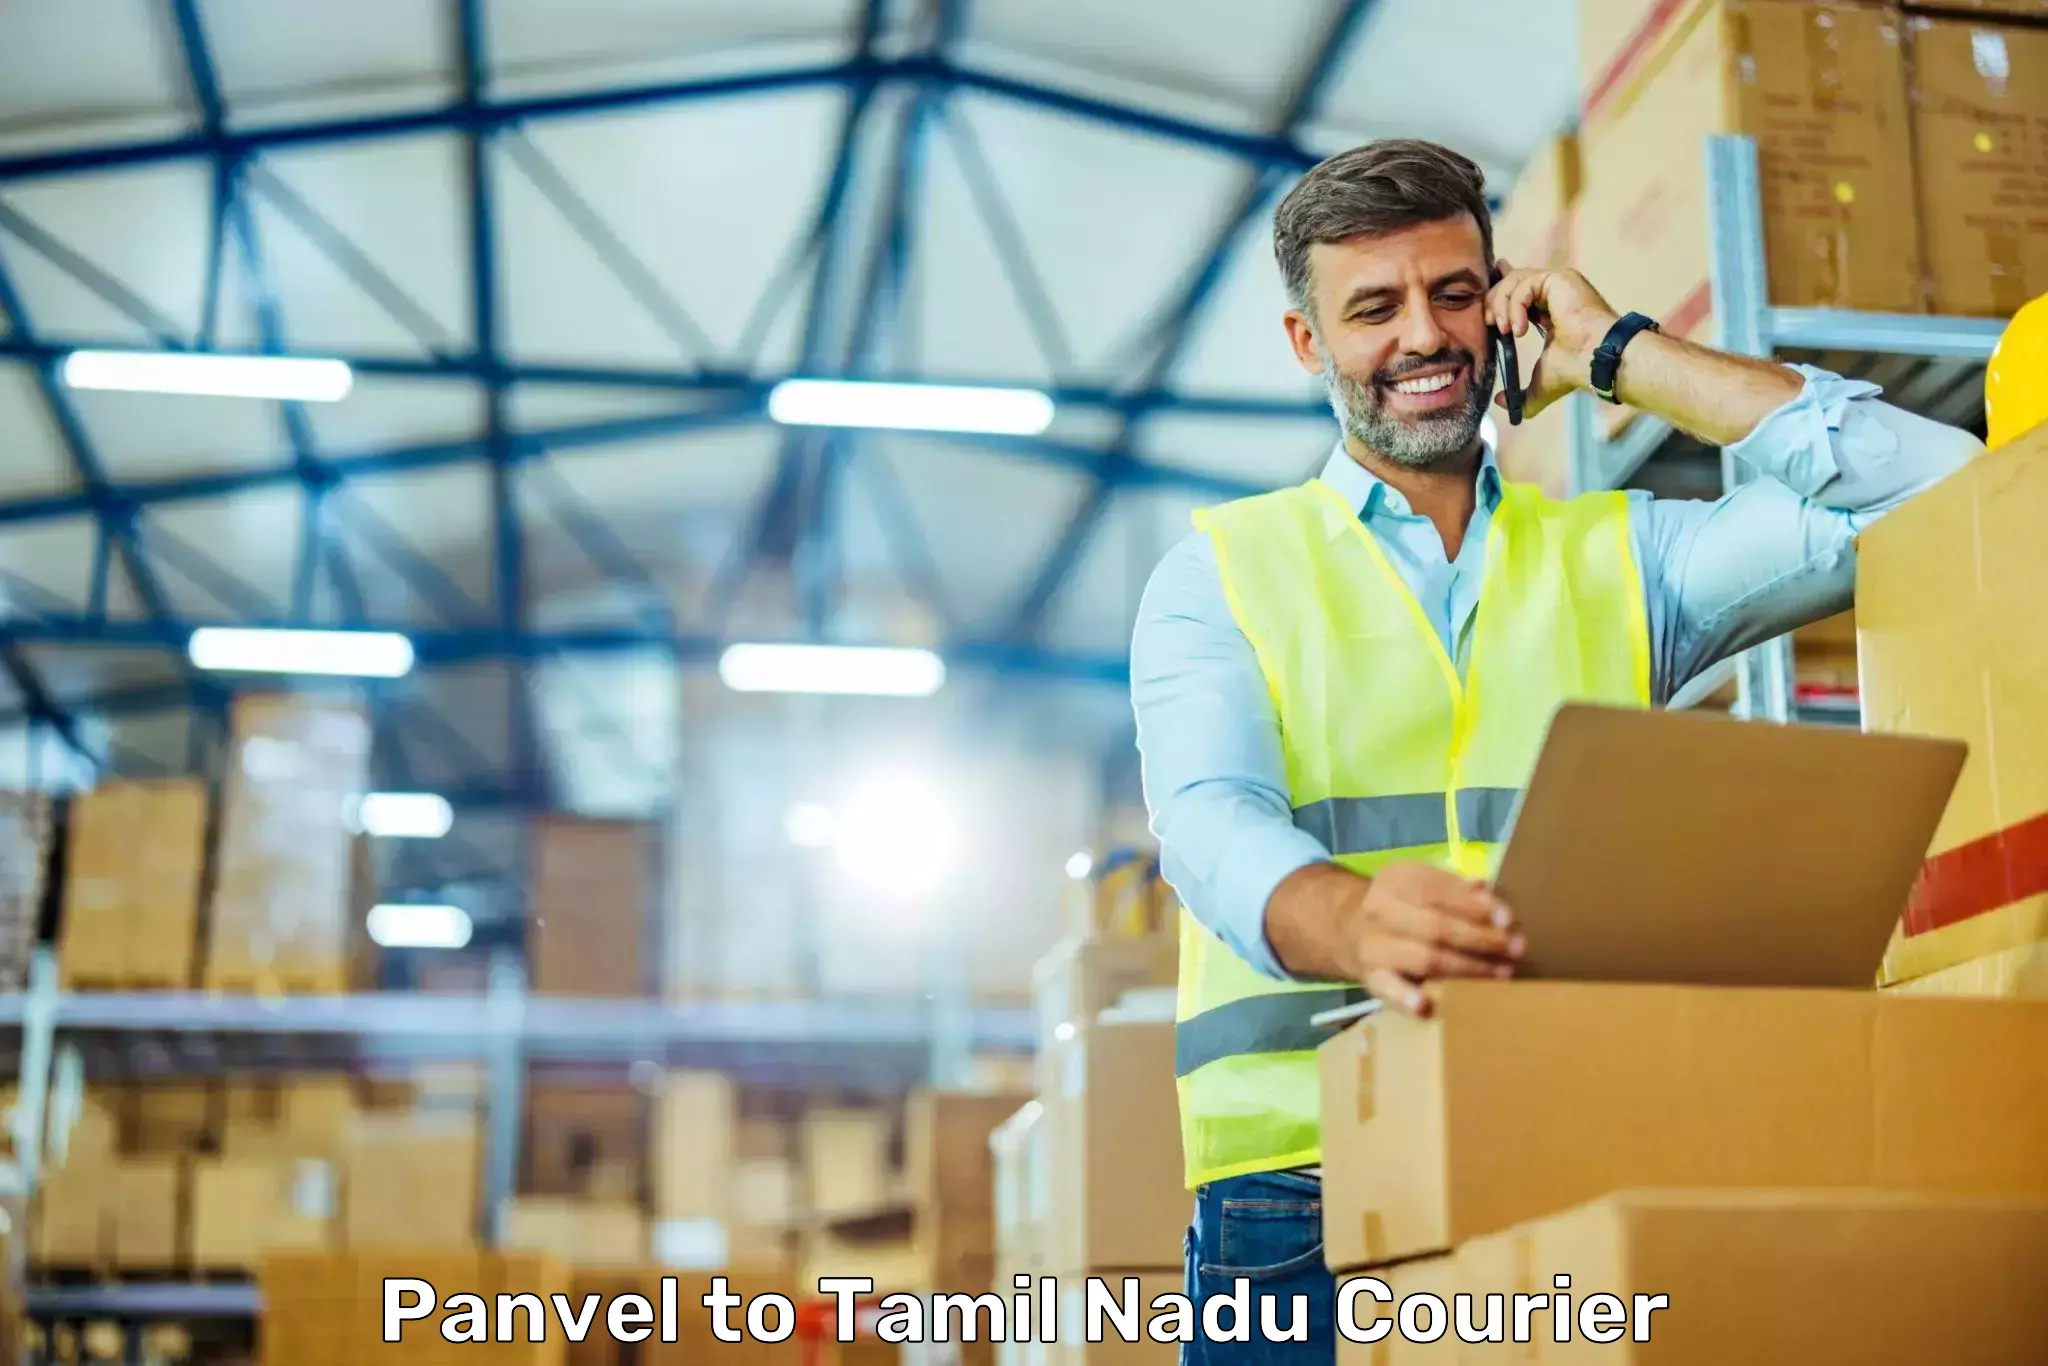 Subscription-based courier Panvel to Perundurai